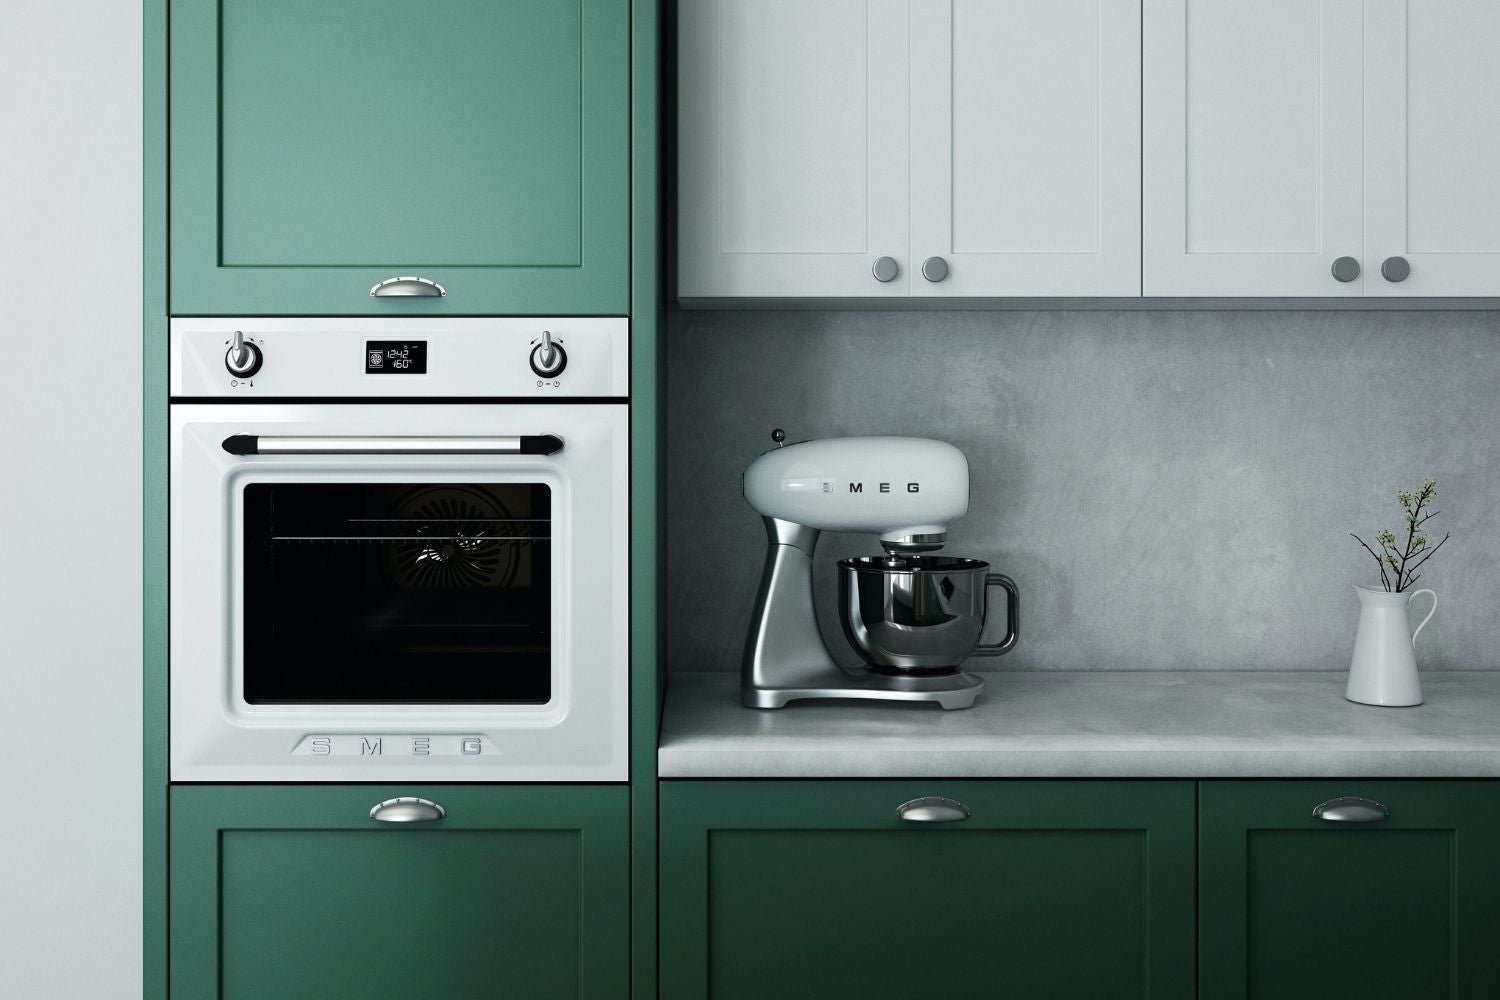 The Best Black Friday Appliance Deals 2020: The Best Deals and Sales on Appliances from Samsung, GE, Whirlpool, and More